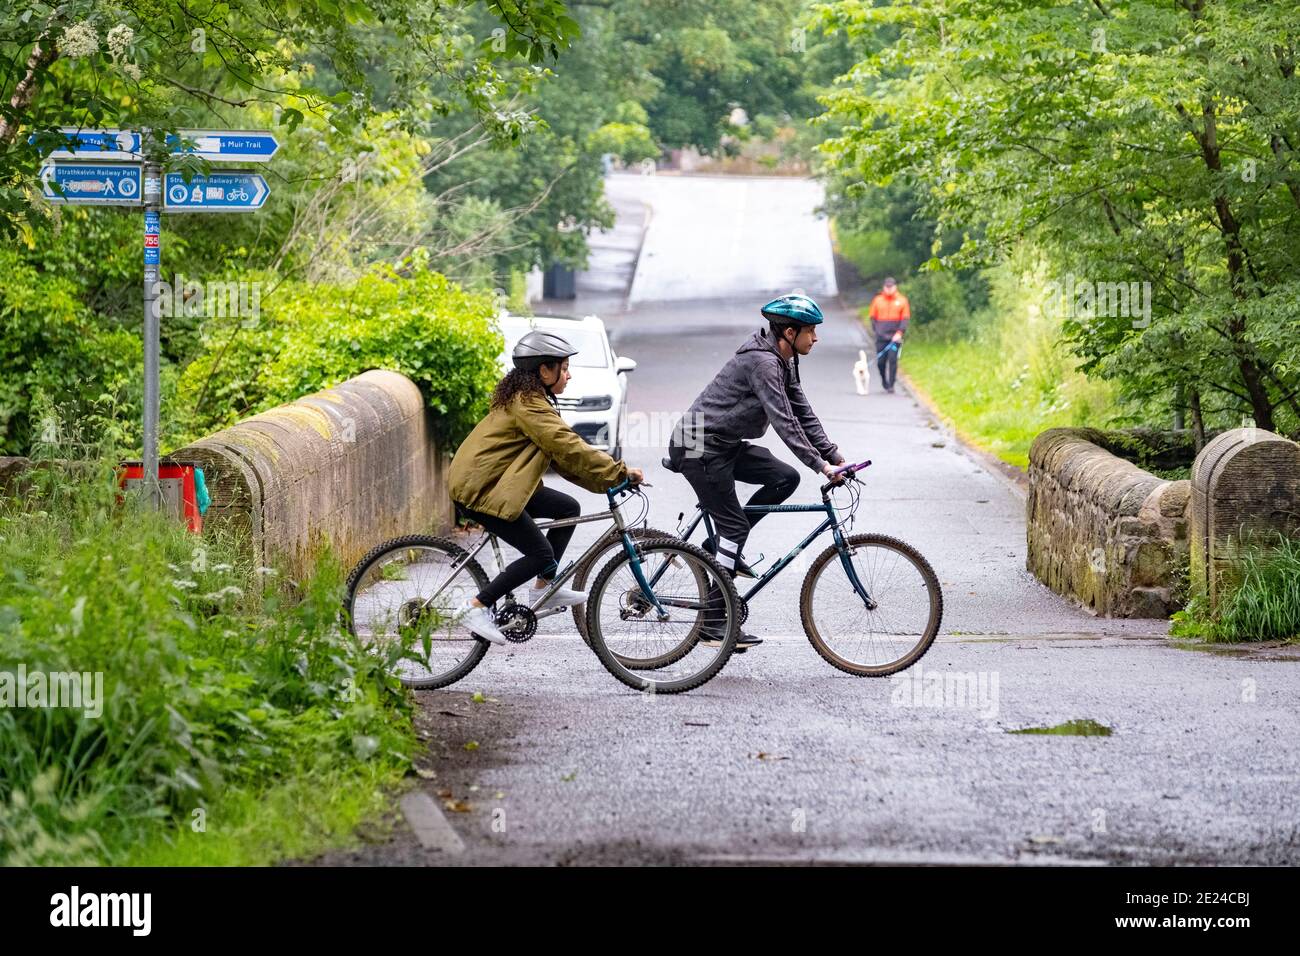 People cycling along roads and pathways Stock Photo